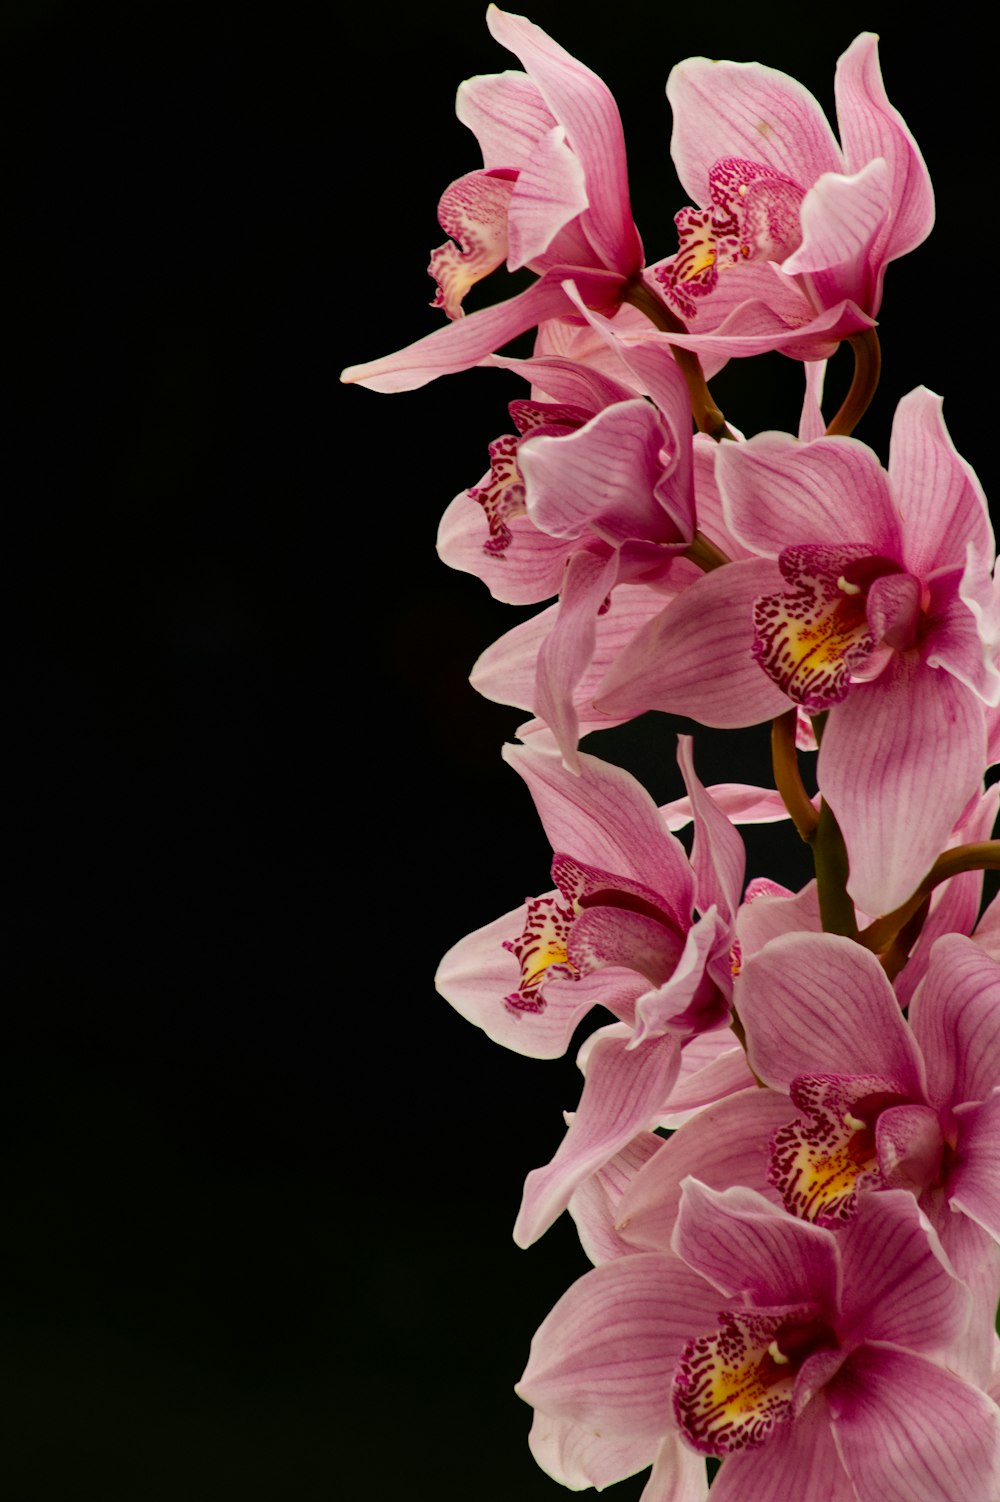 pink and white flowers in black background